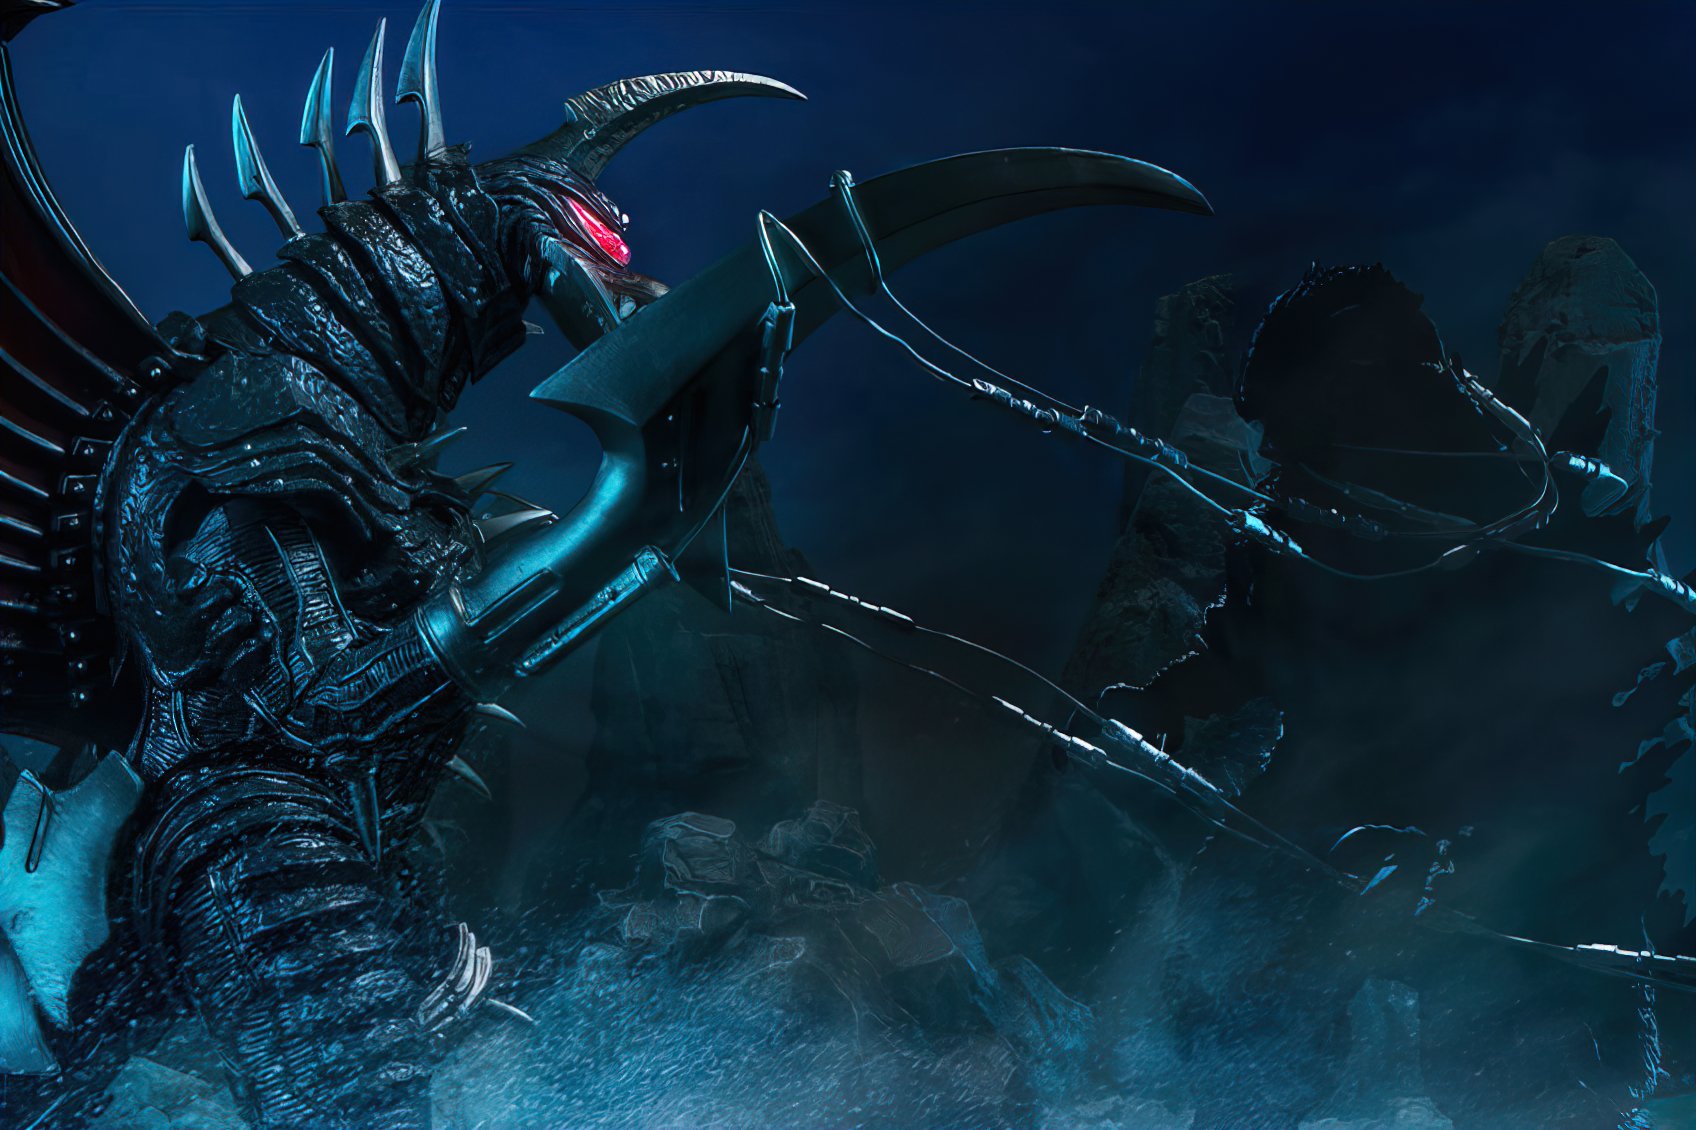 Final Wars Gojira and Godzilla Ultima are joining the S.H. MonsterArts lineup!